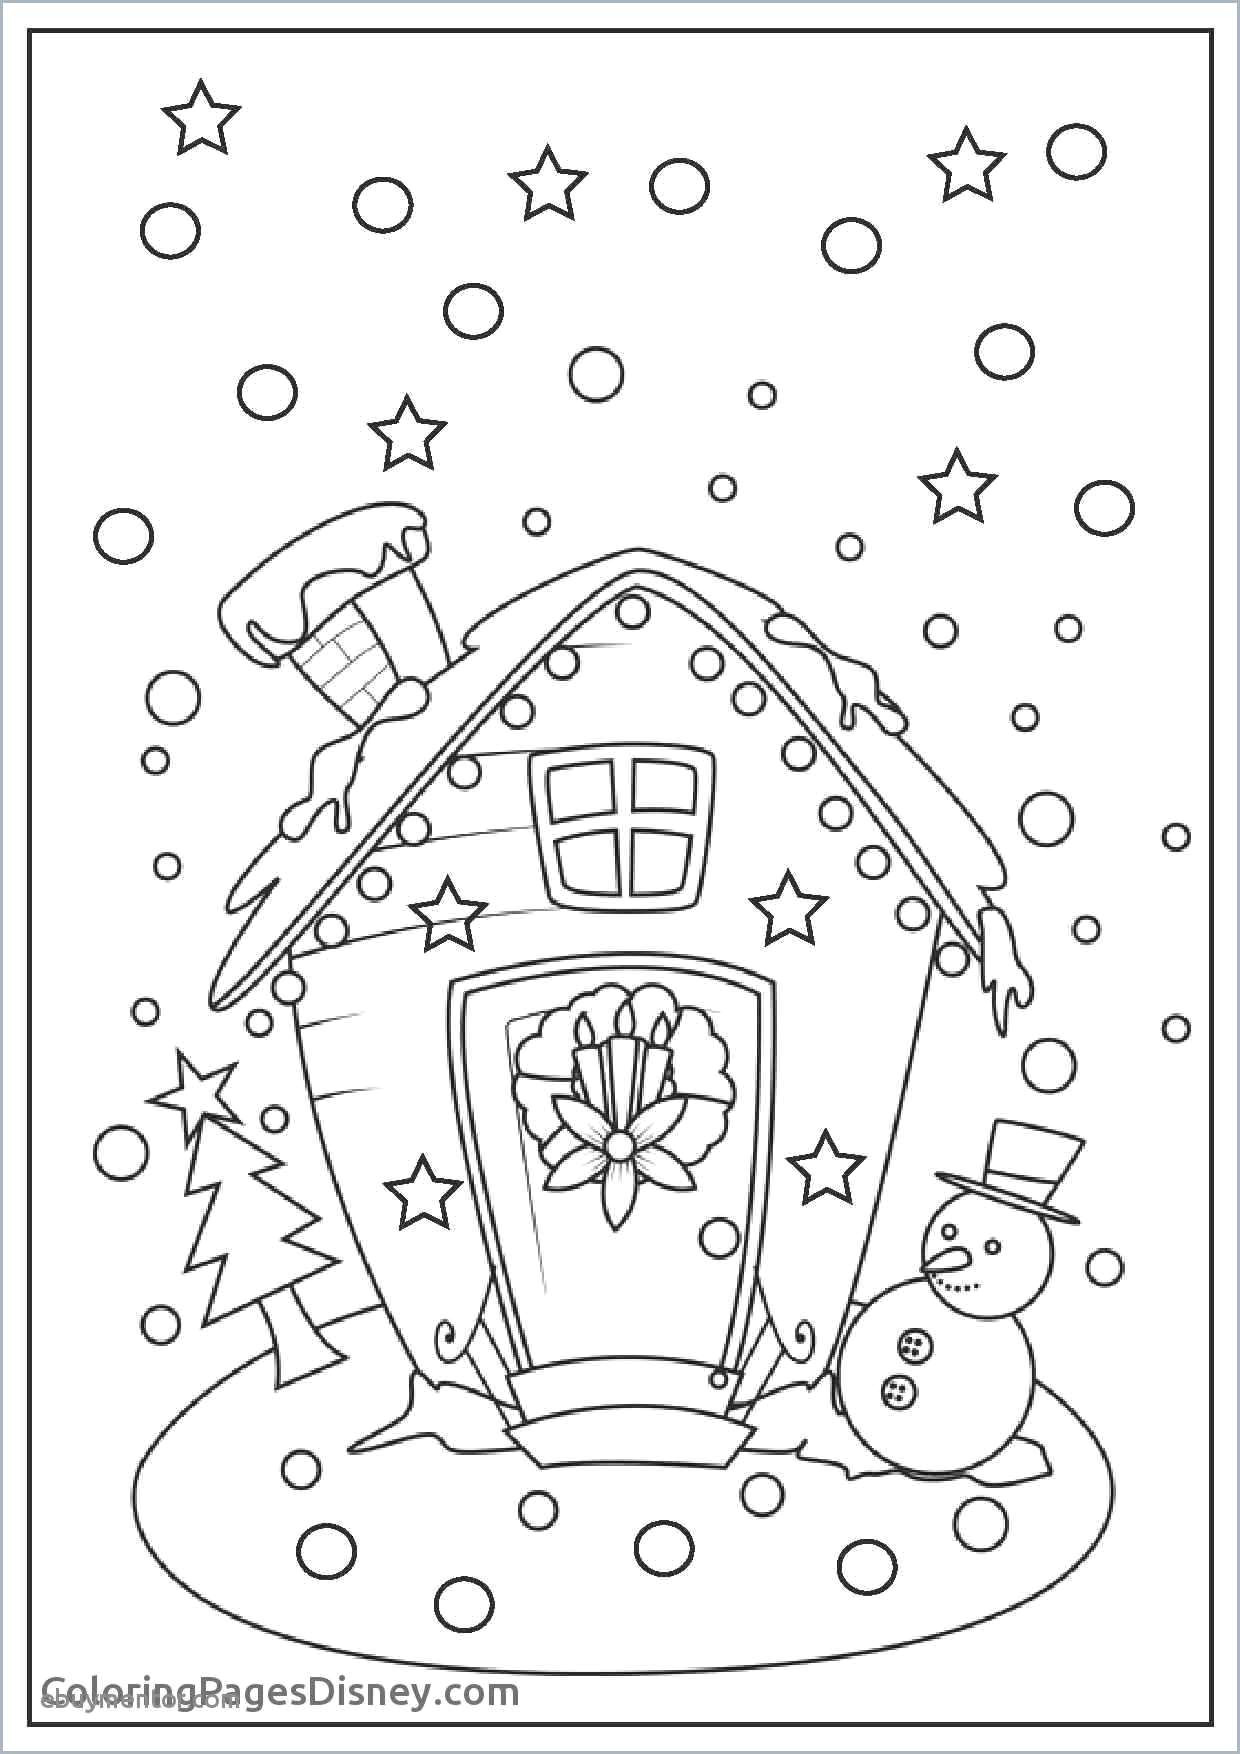 Easy Drawings for Adults Coloring Sheets for Kids Admirable Cool Coloring Page for Adult Od